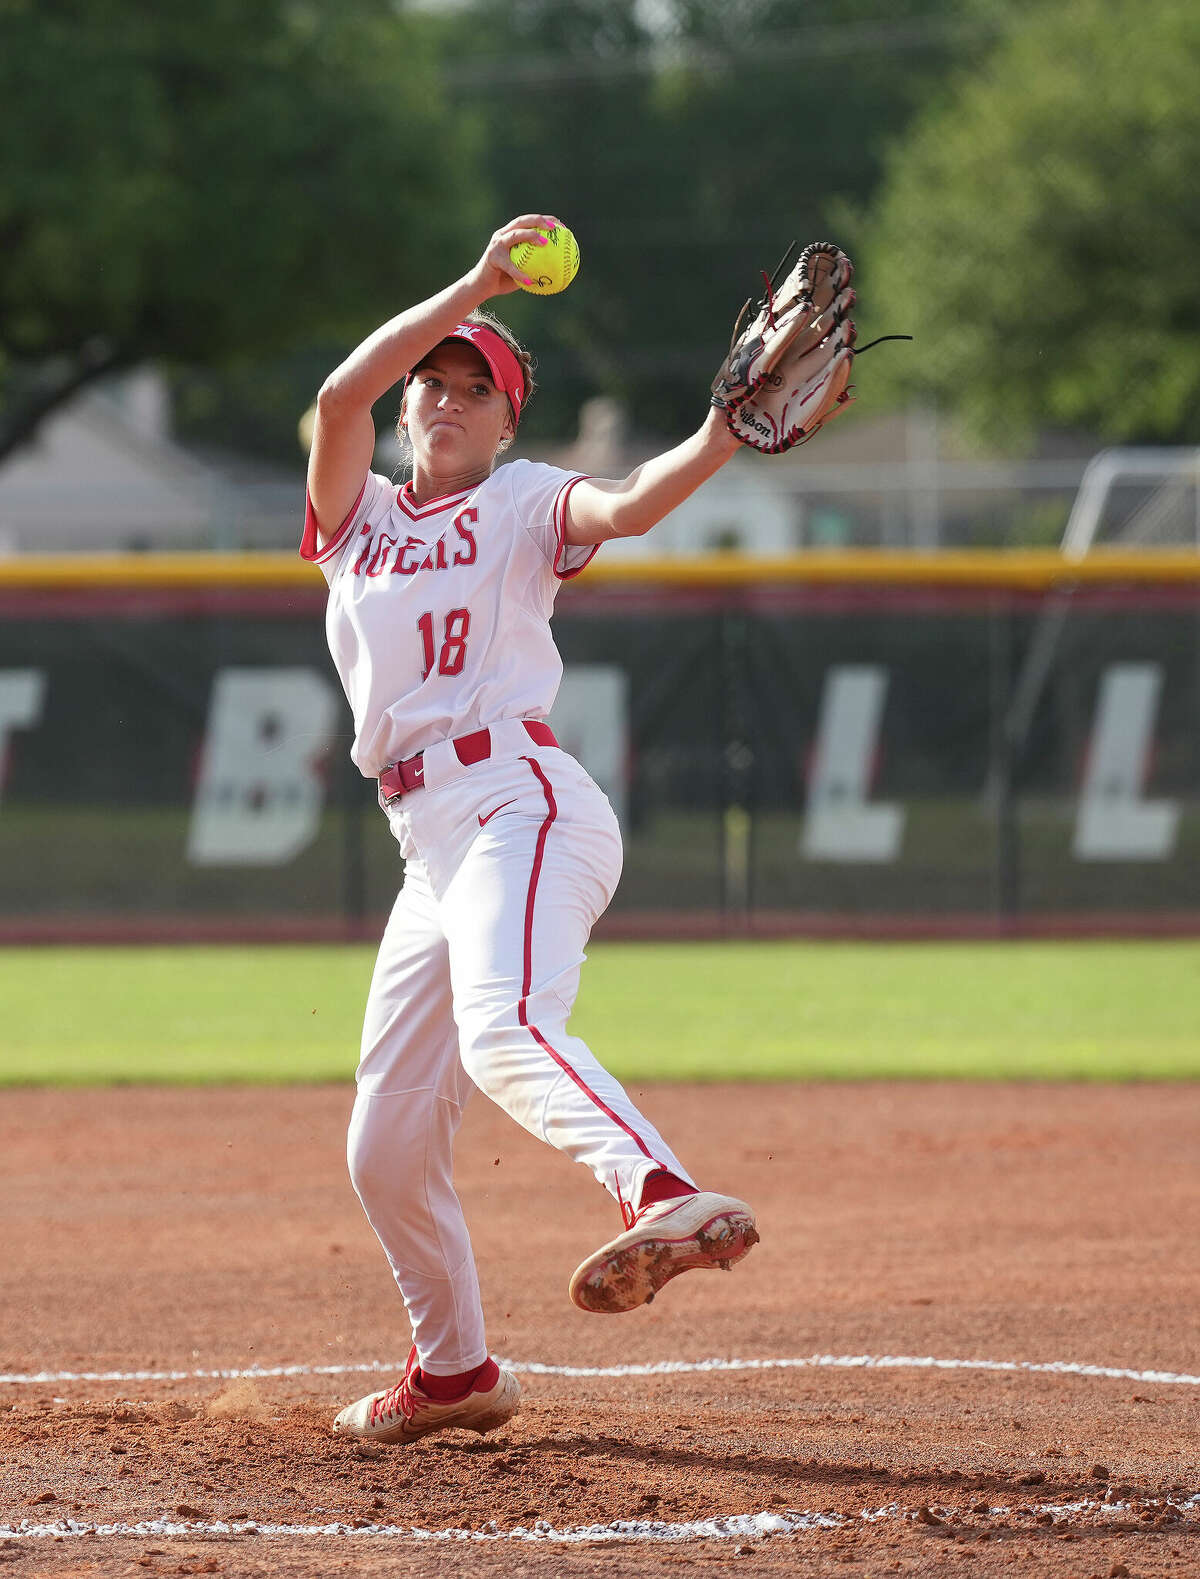 Katy's starting pitcher Lauryn Soeken (18) pitches during the first inning during a Region III-6A quarterfinals softball game at Katy High School on Friday, May 13, 2022 in Katy. Katy beat Cinco Ranch 10-0 in six innings.